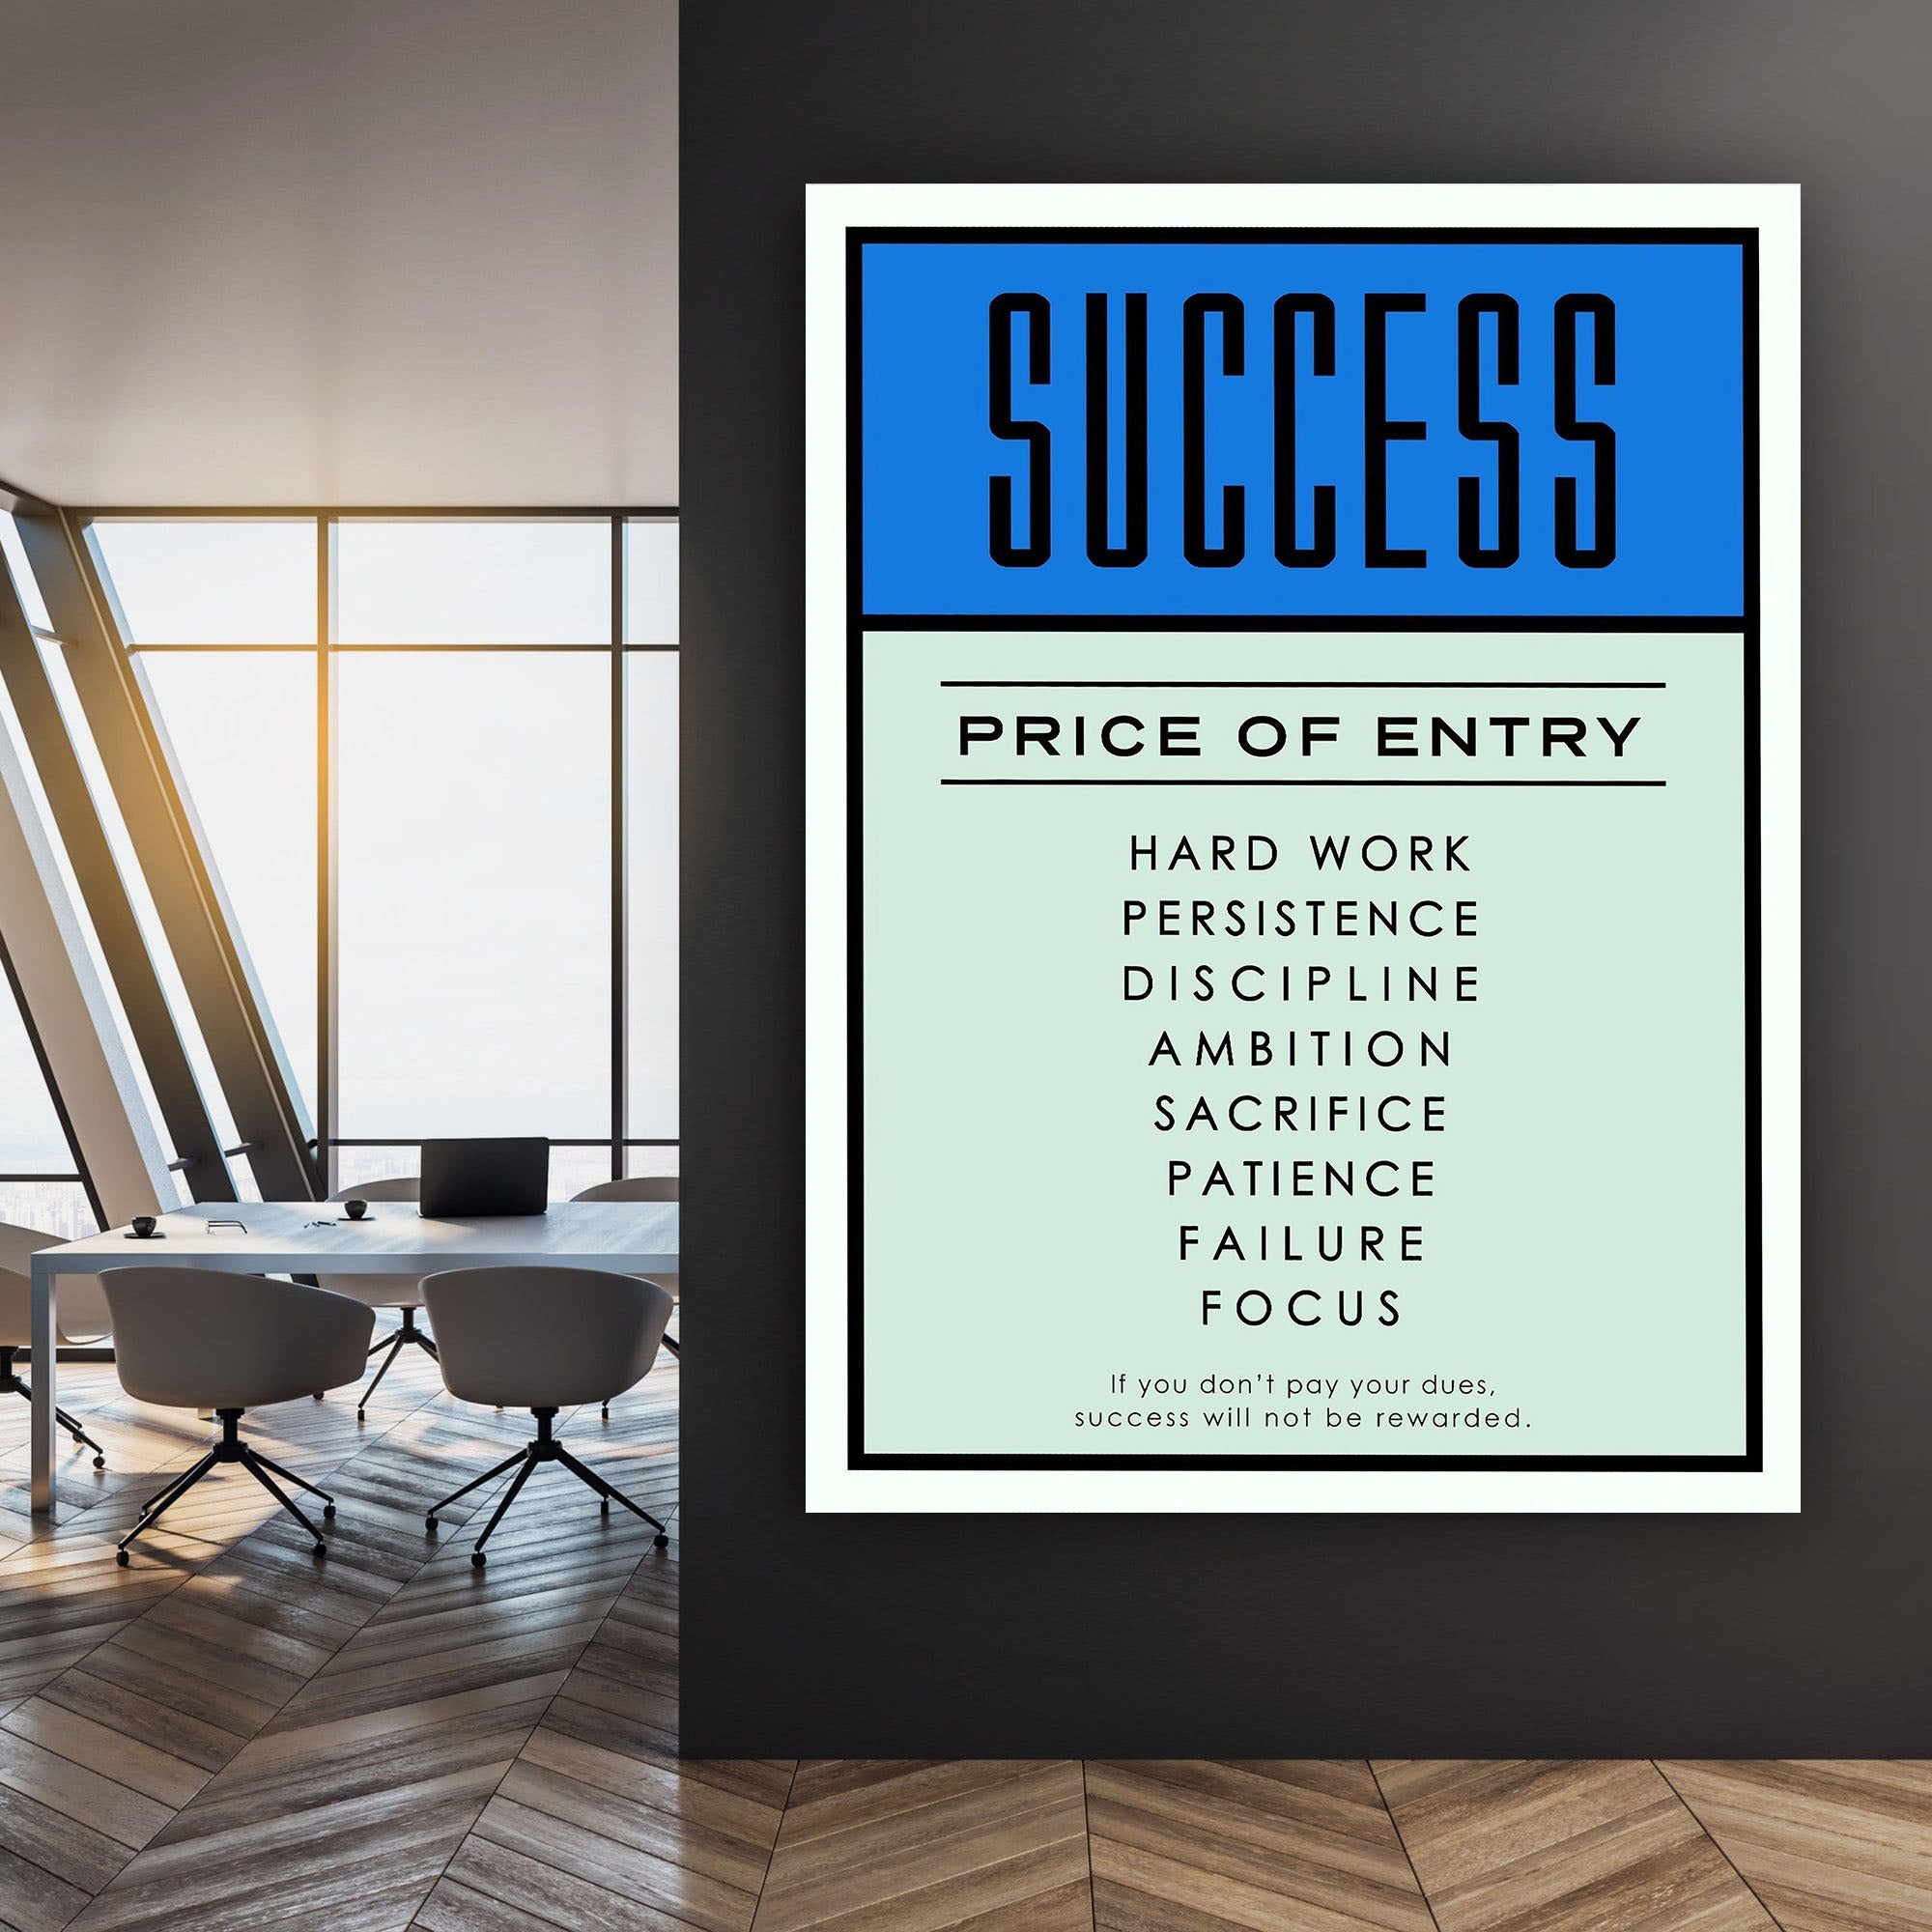 The Price of Success